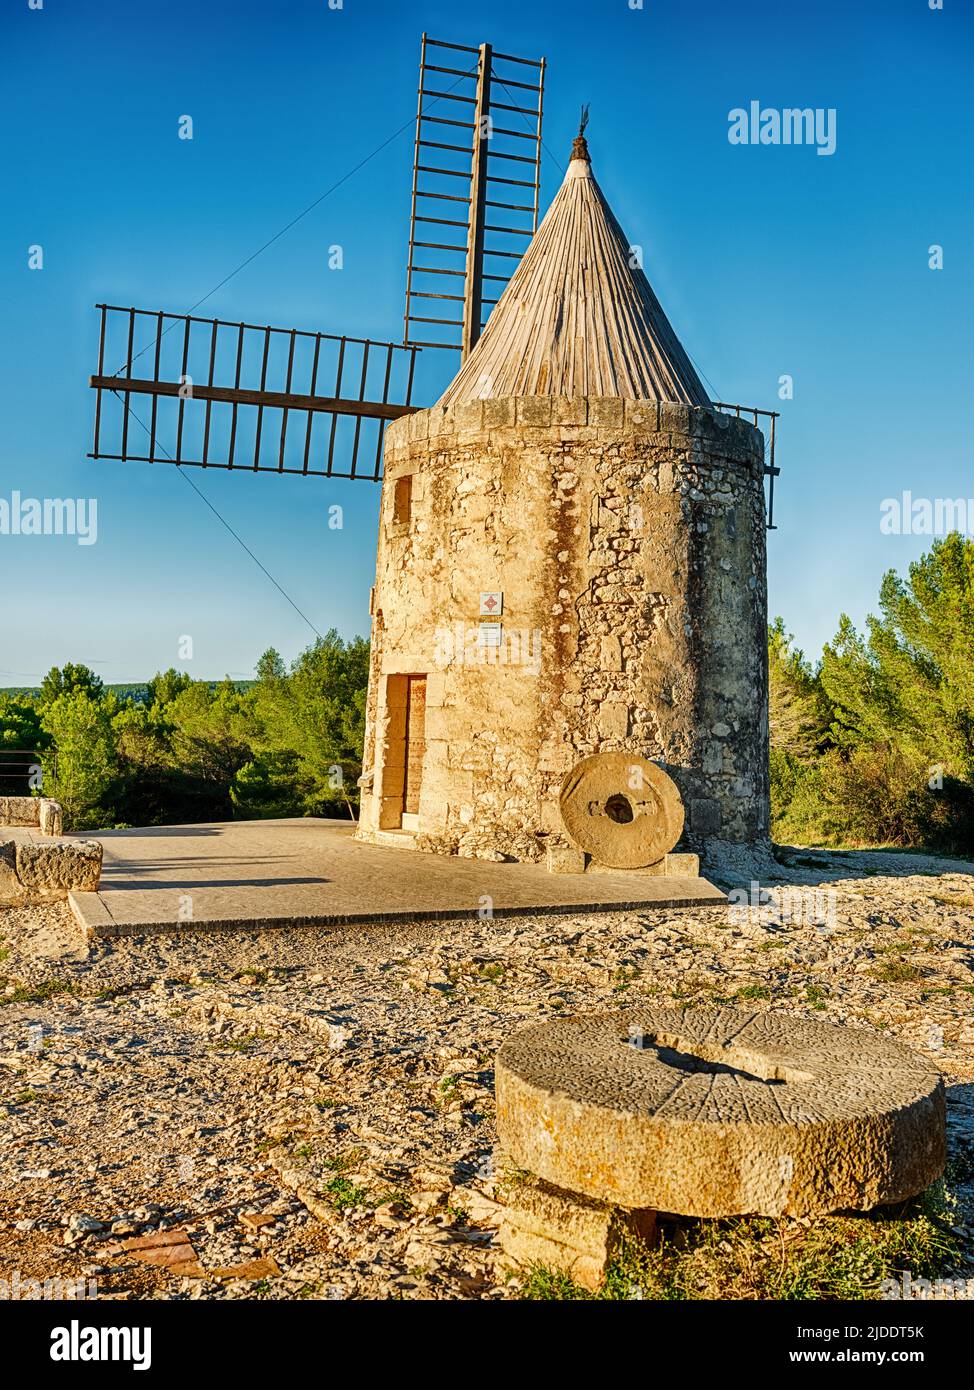 The old windmill, or moulin, at Fontvielle is a historic landmark of France. Stock Photo